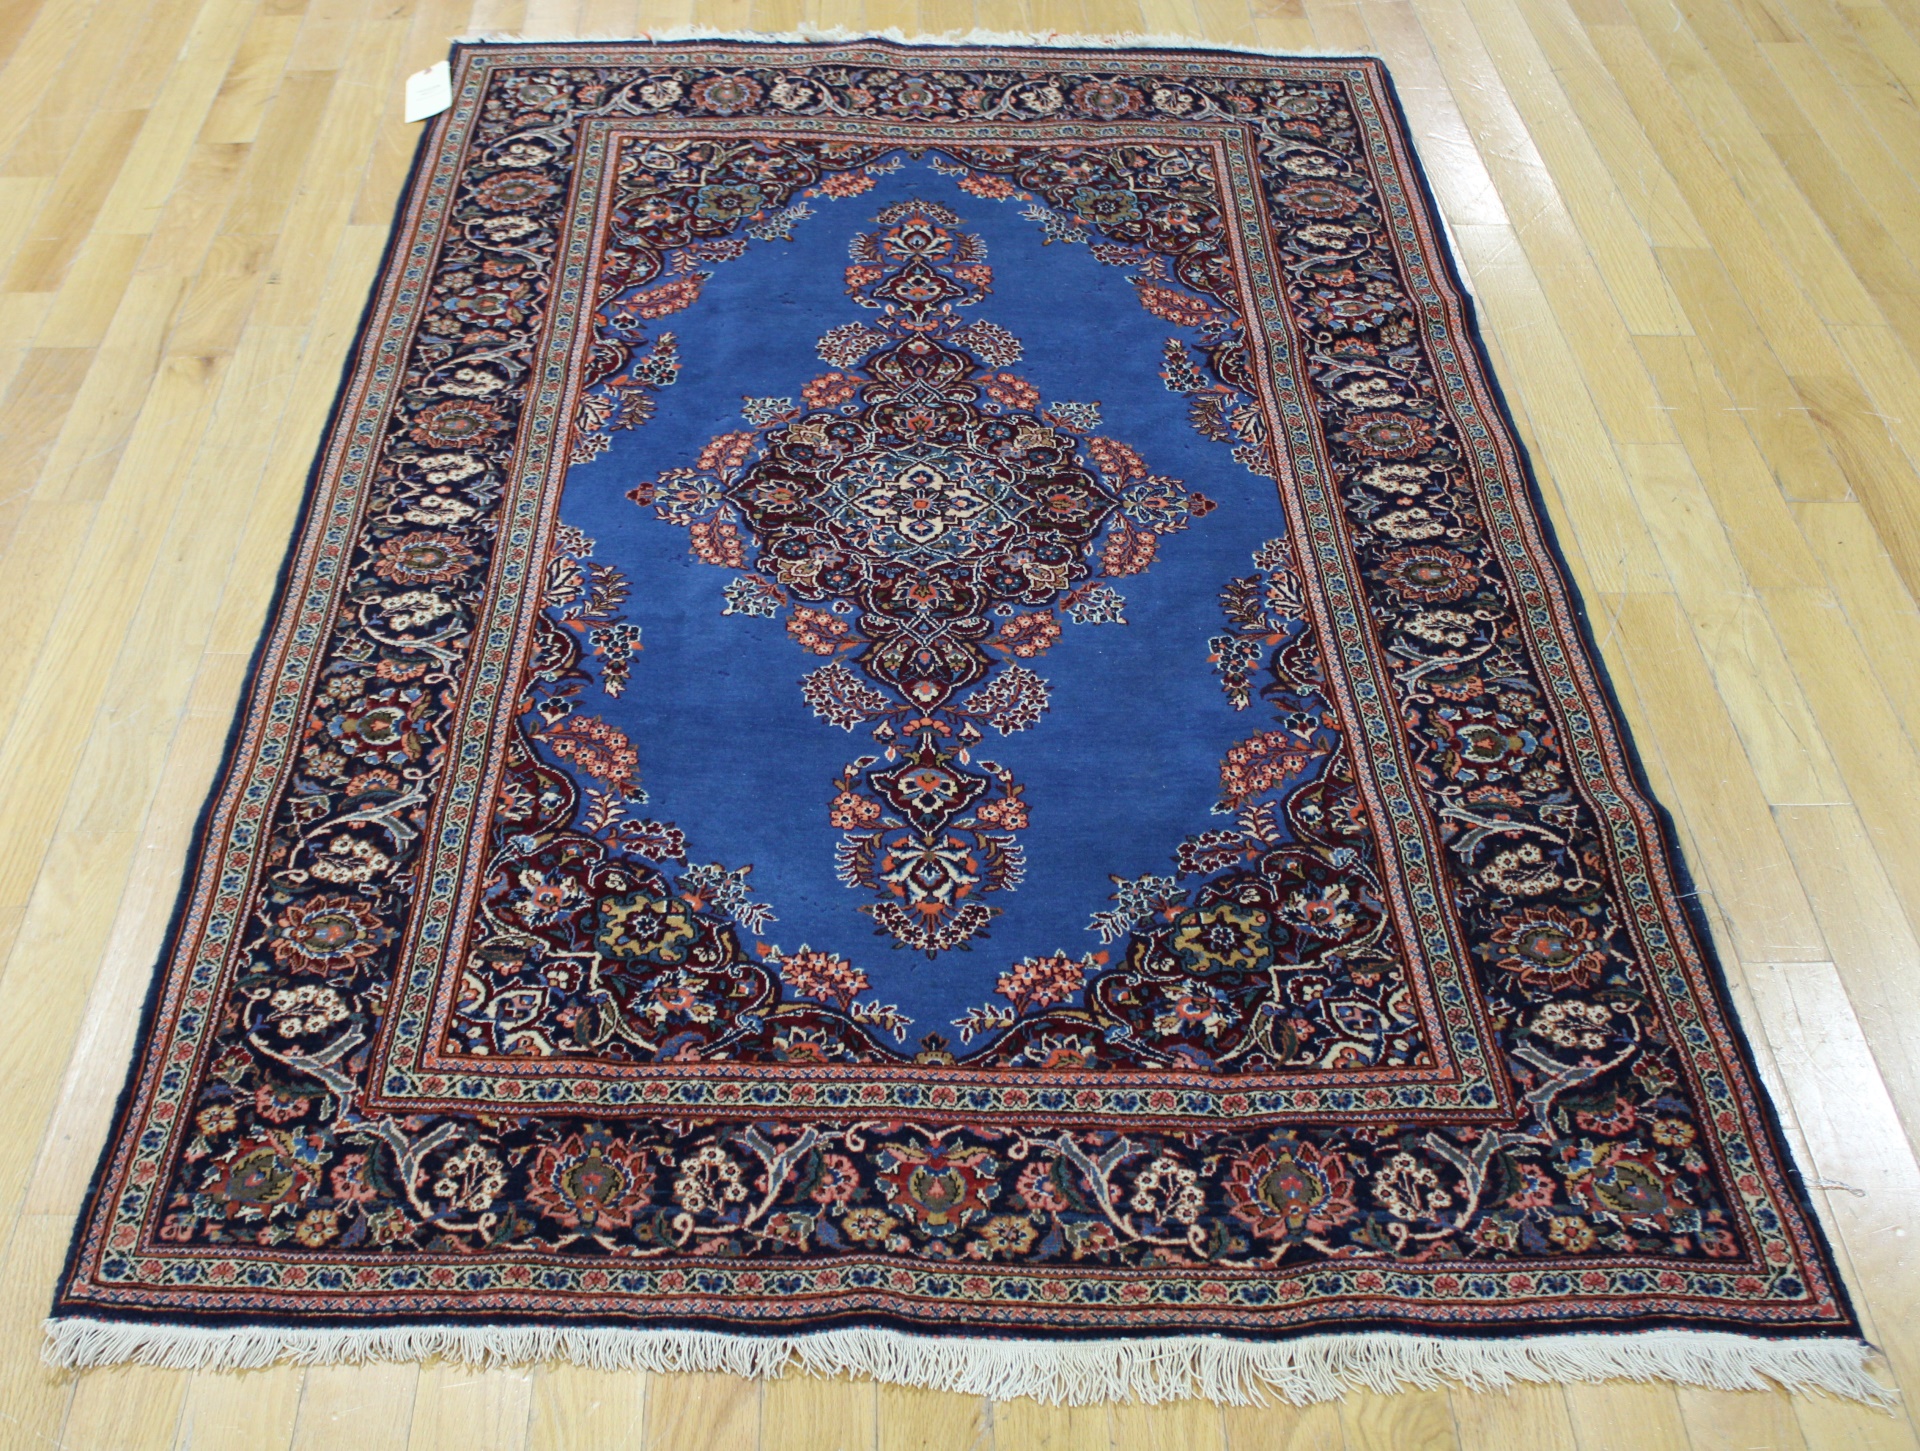 ANTIQUE AND FINELY HAND WOVEN KASHAN 3ba913